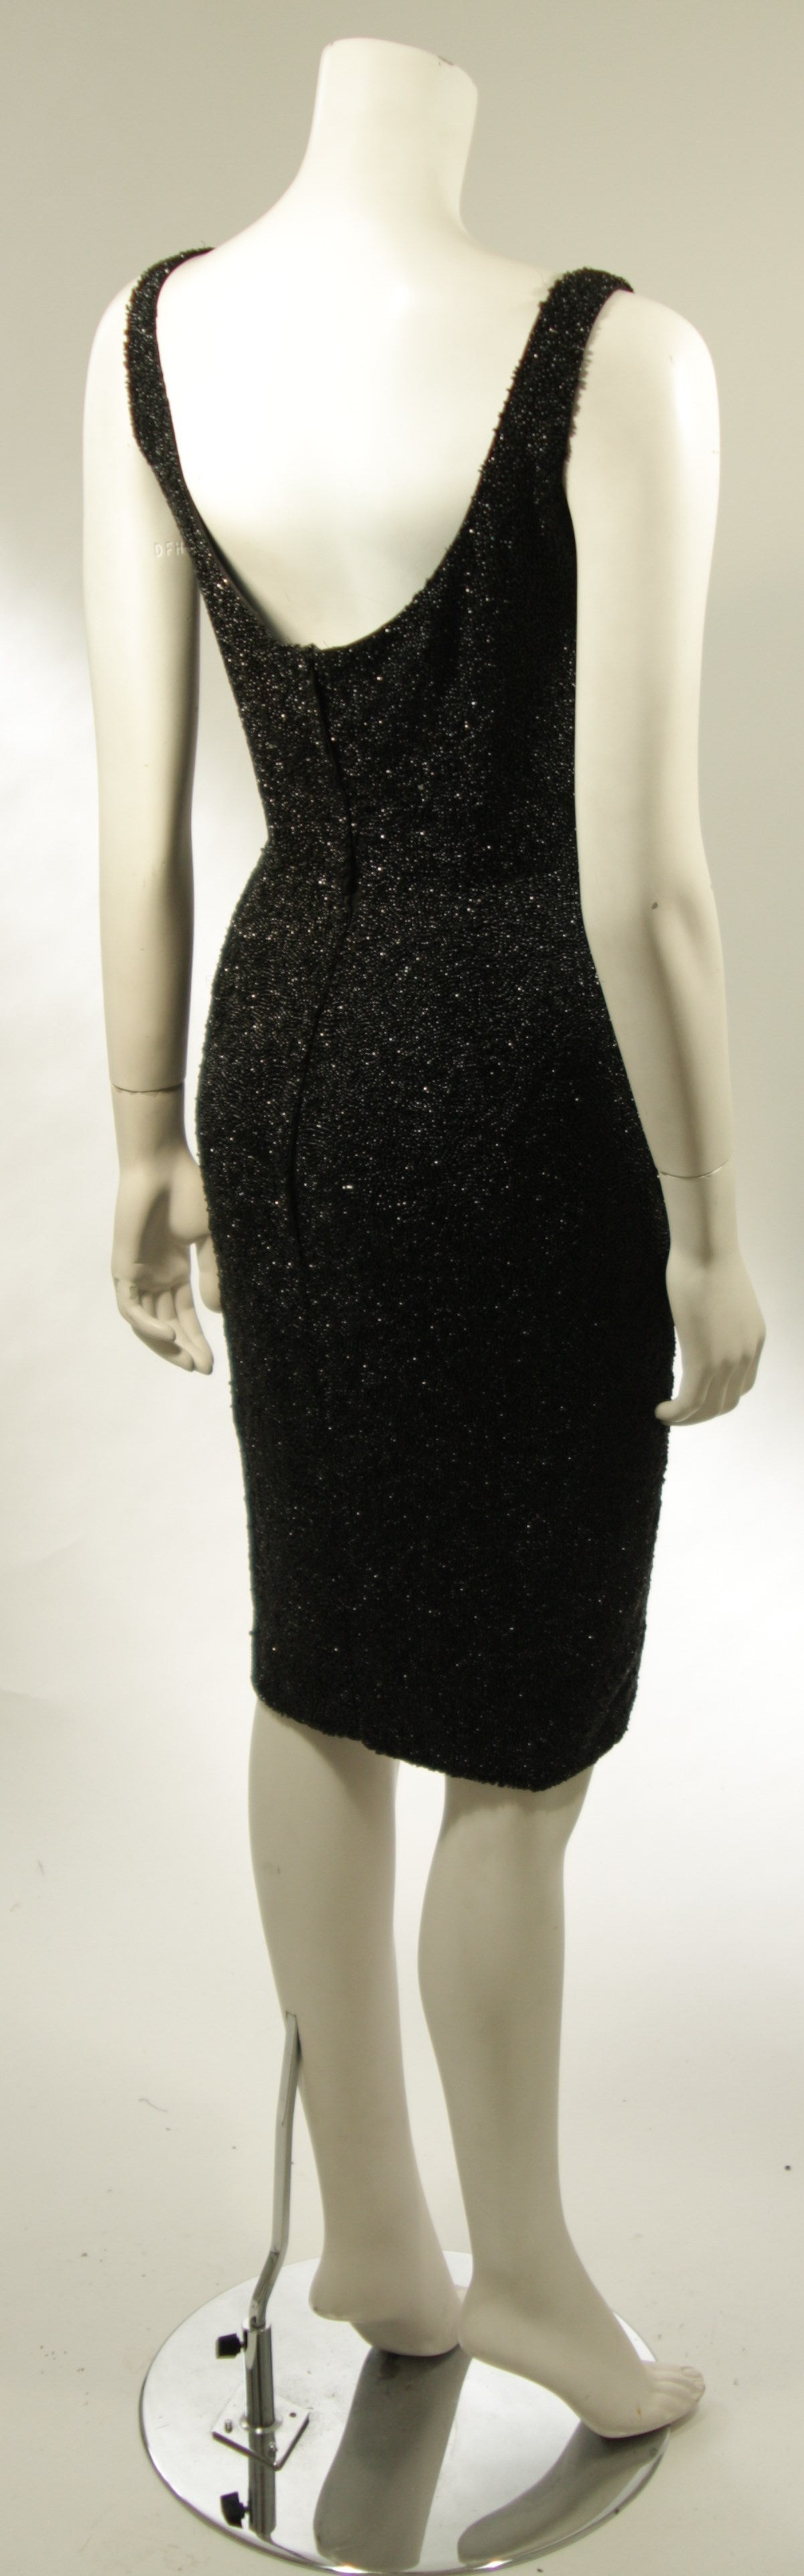 1960's Rare Black Caviar Beaded Cocktail Dress Size Large For Sale 2